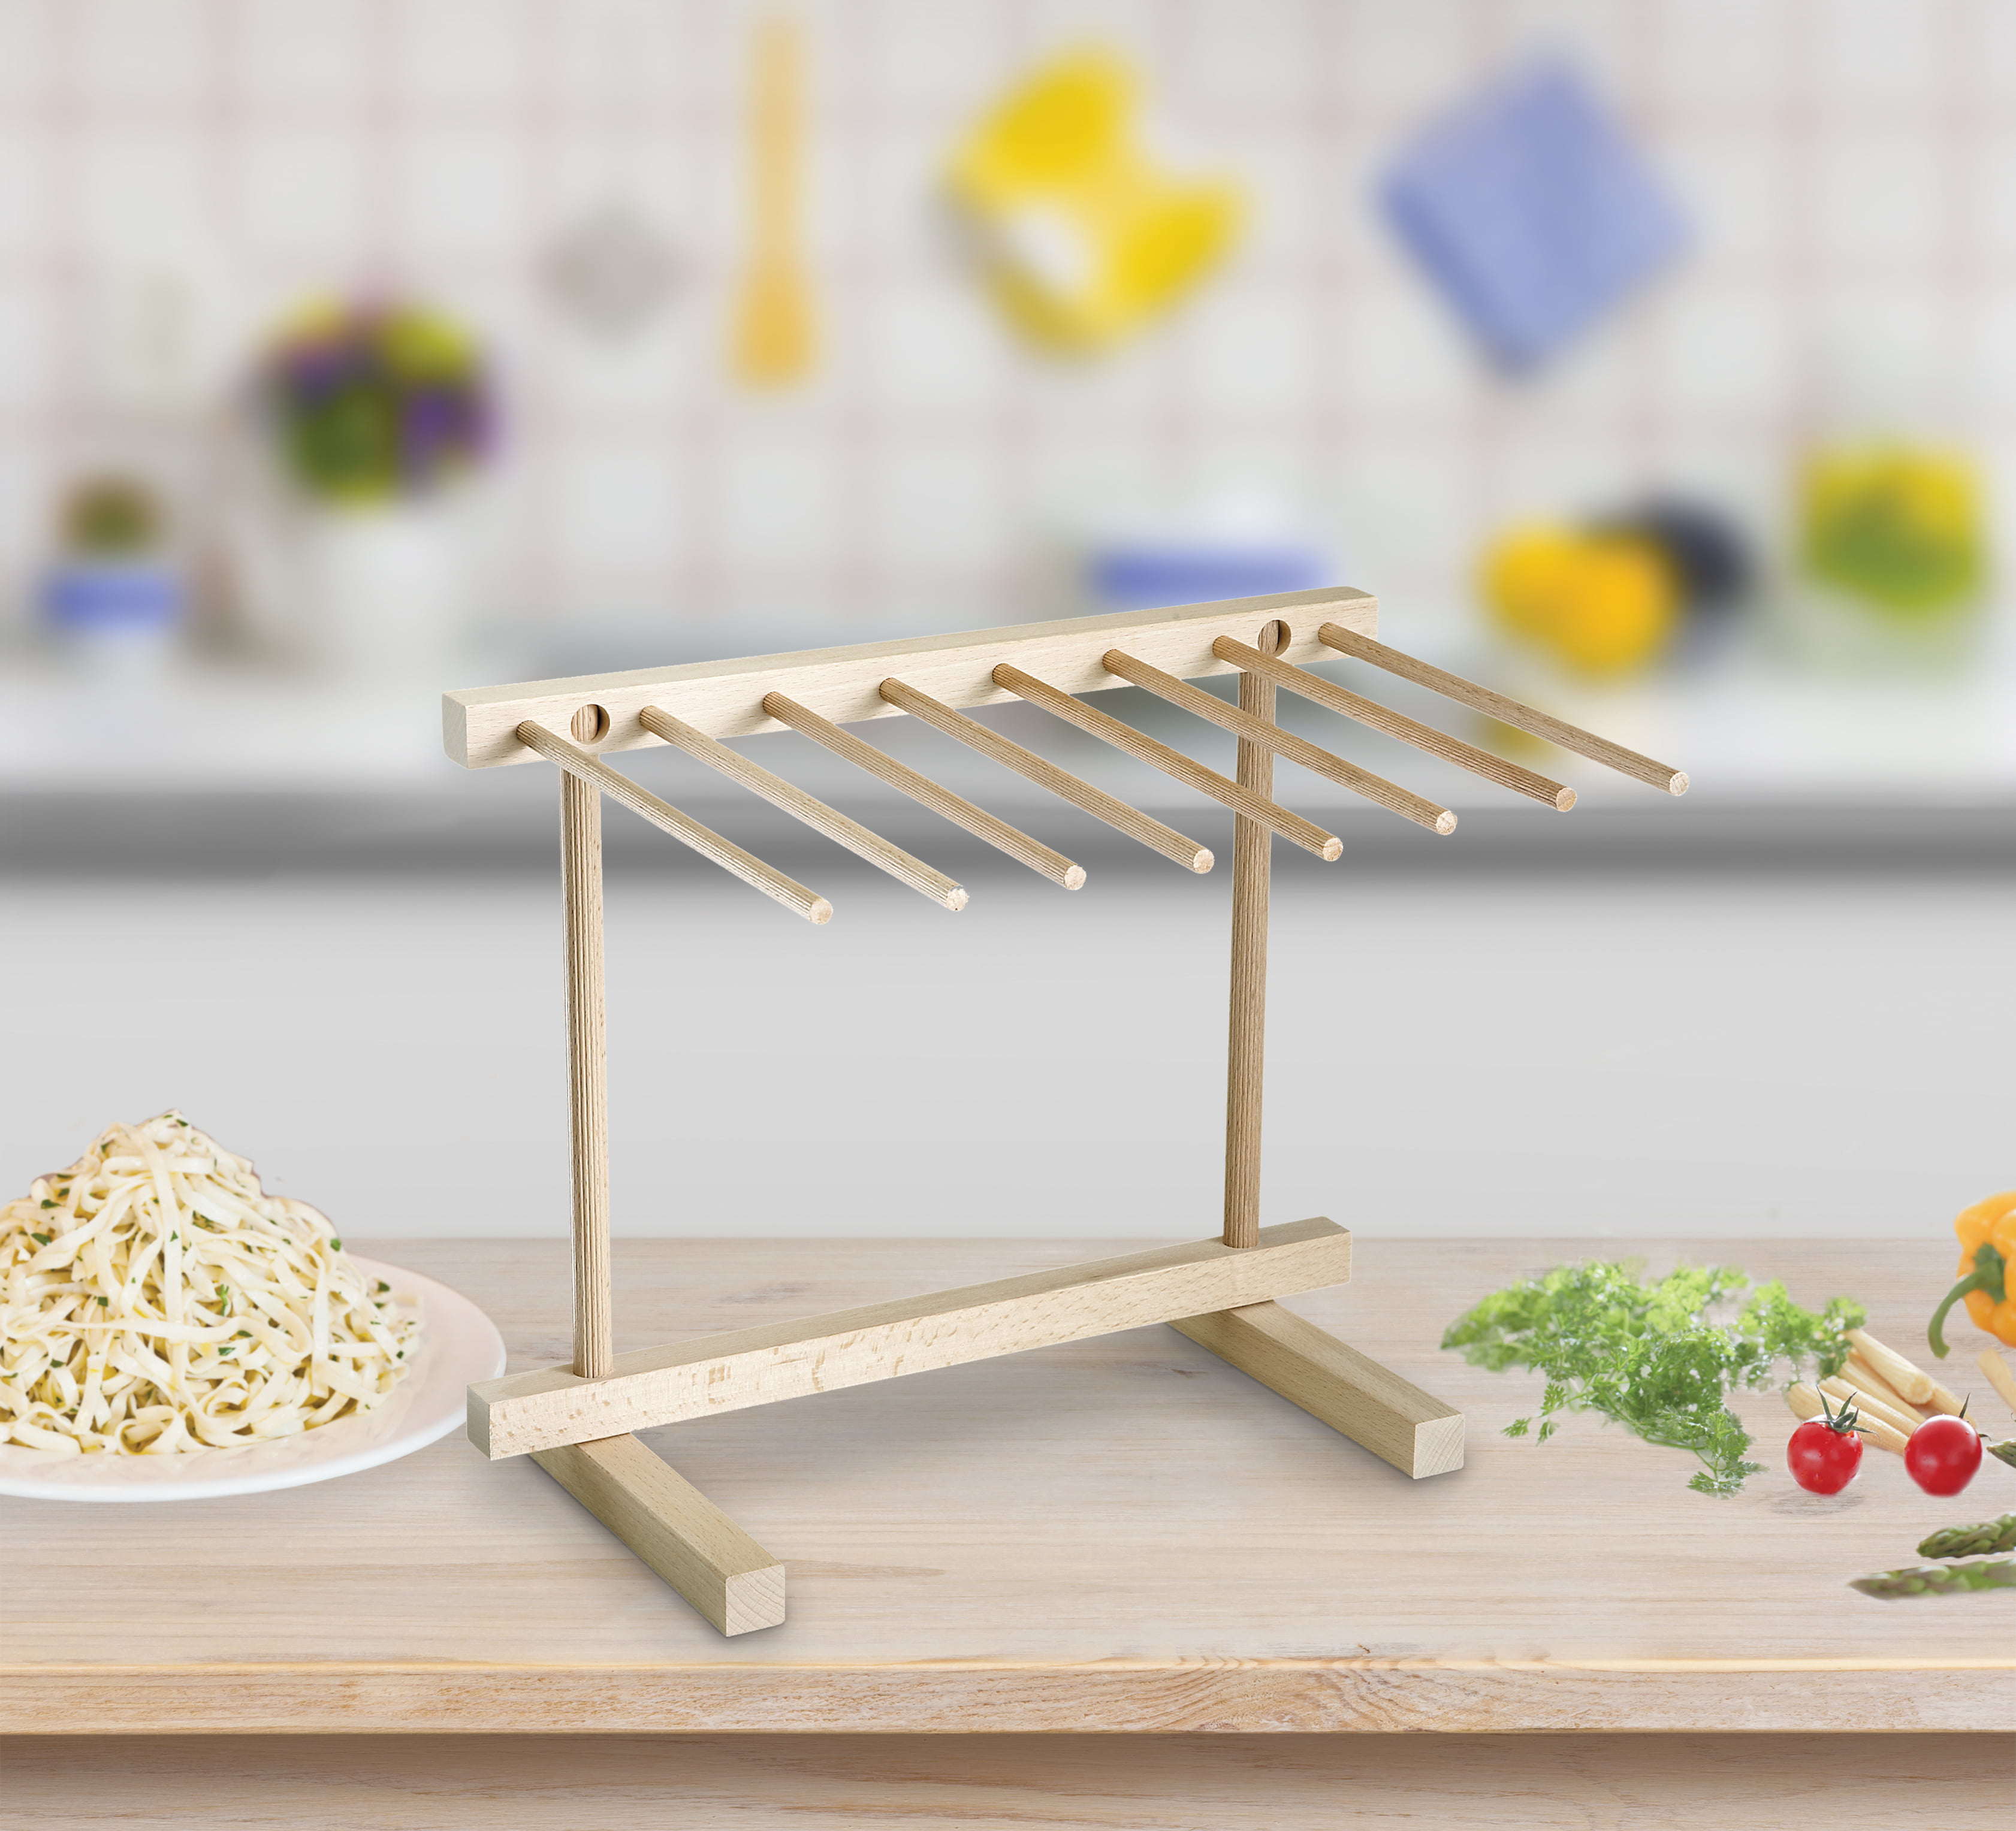 Tohuu Pasta Drying Rack Wooden Noodle Fisherman Pasta Holder with 12 Arms  Spaghetti Drying Rack Noodle Stand for Making Pasta Maker Noodles elegance  